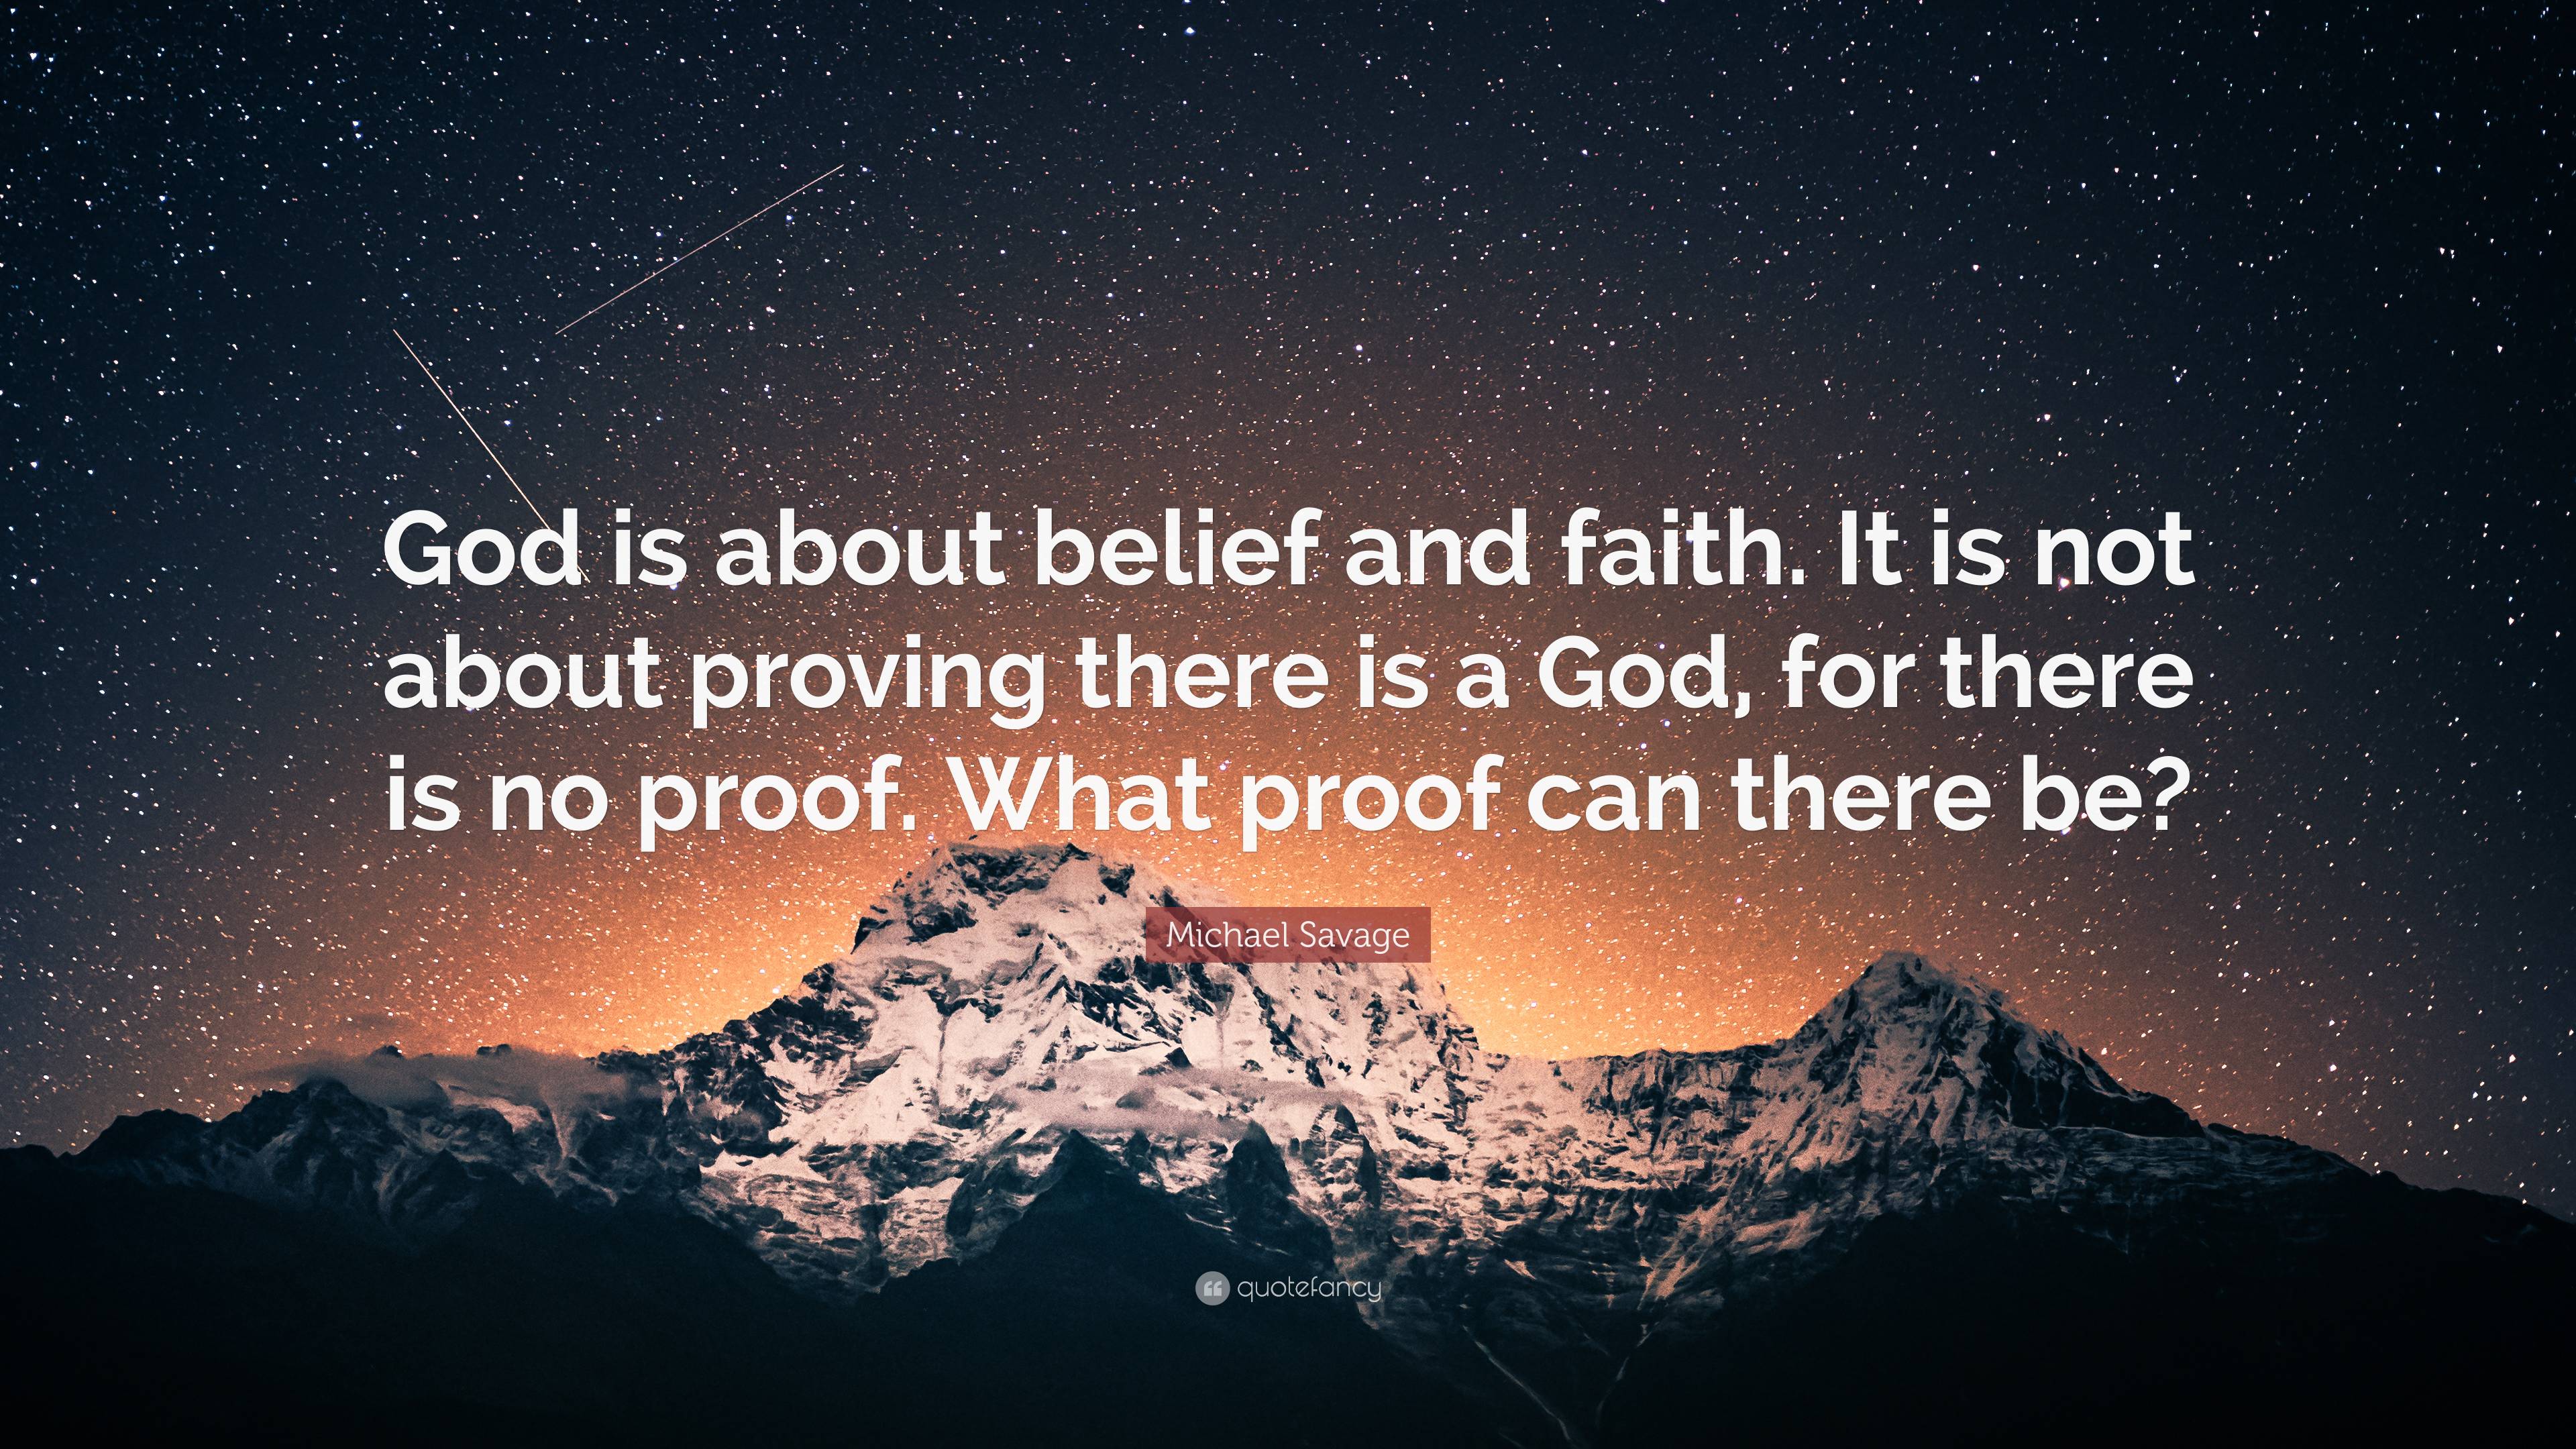 Michael Savage Quote: “God is about belief and faith. It is not about ...